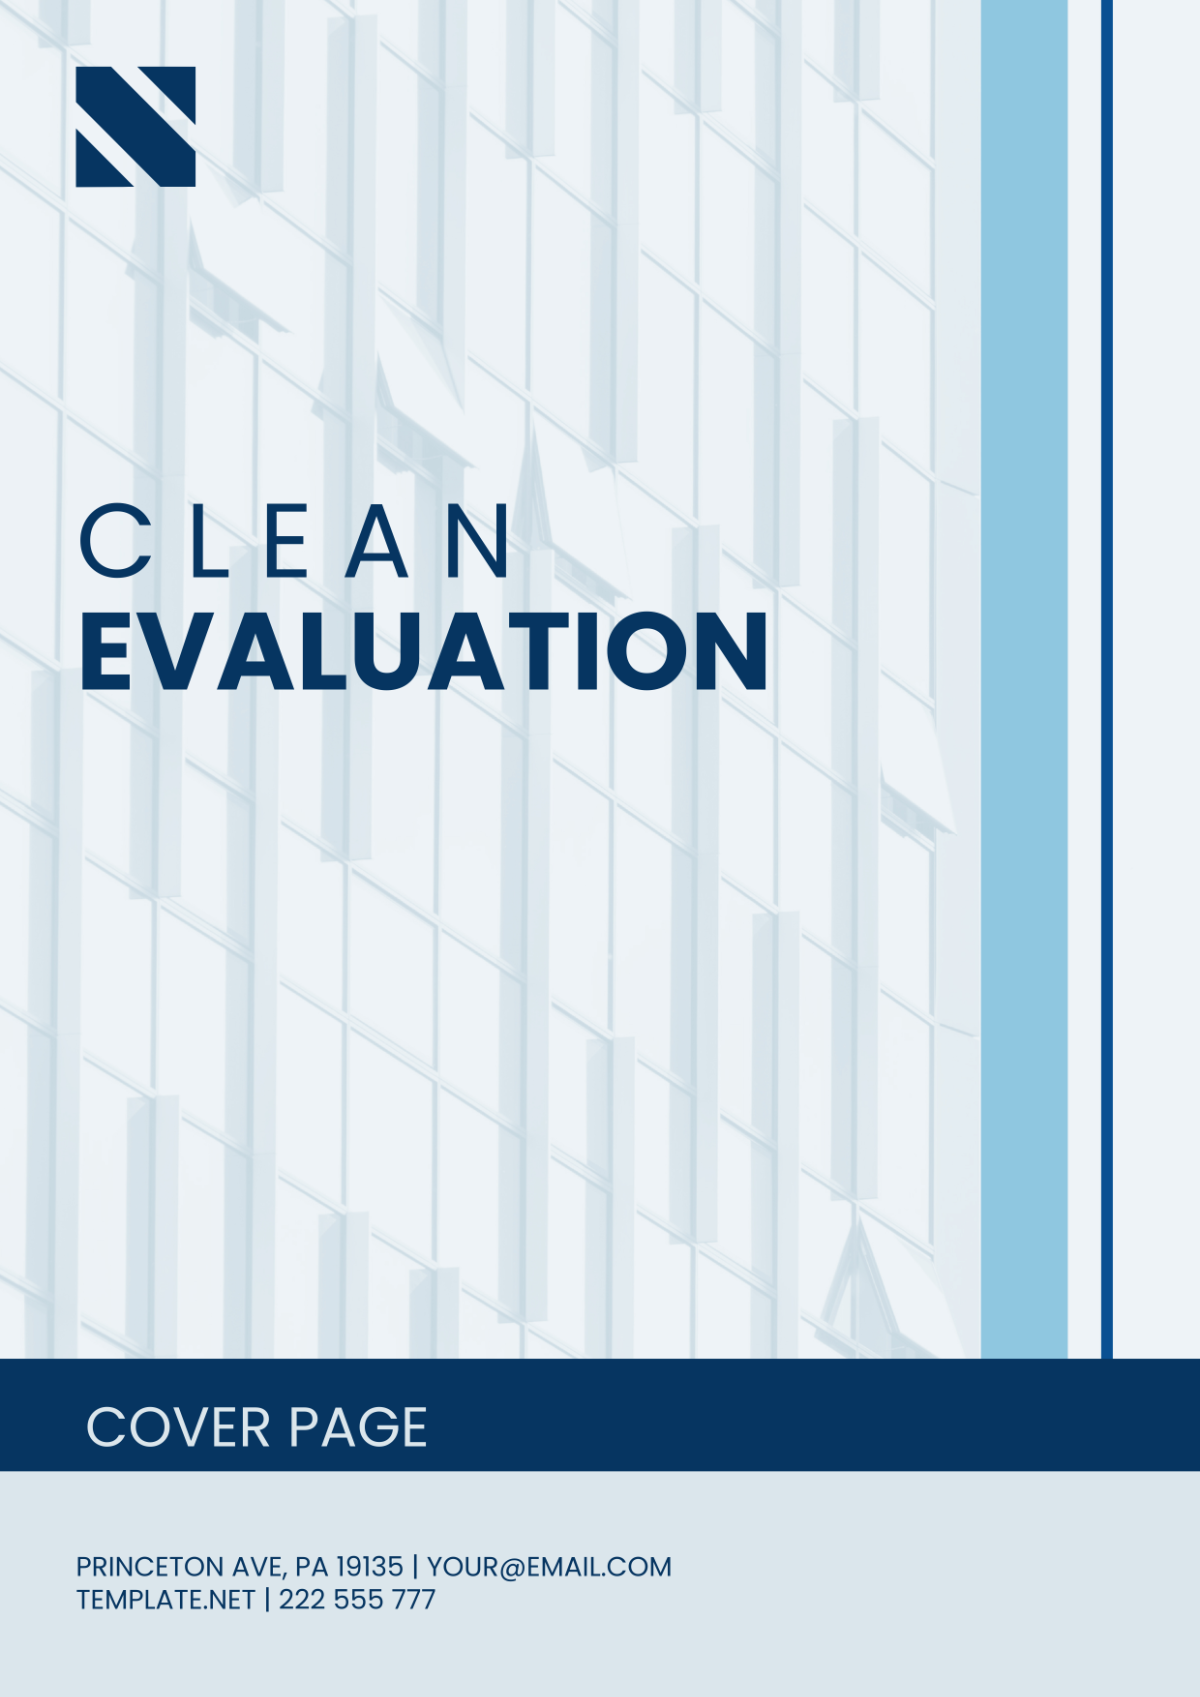 Clean Evaluation Cover Page